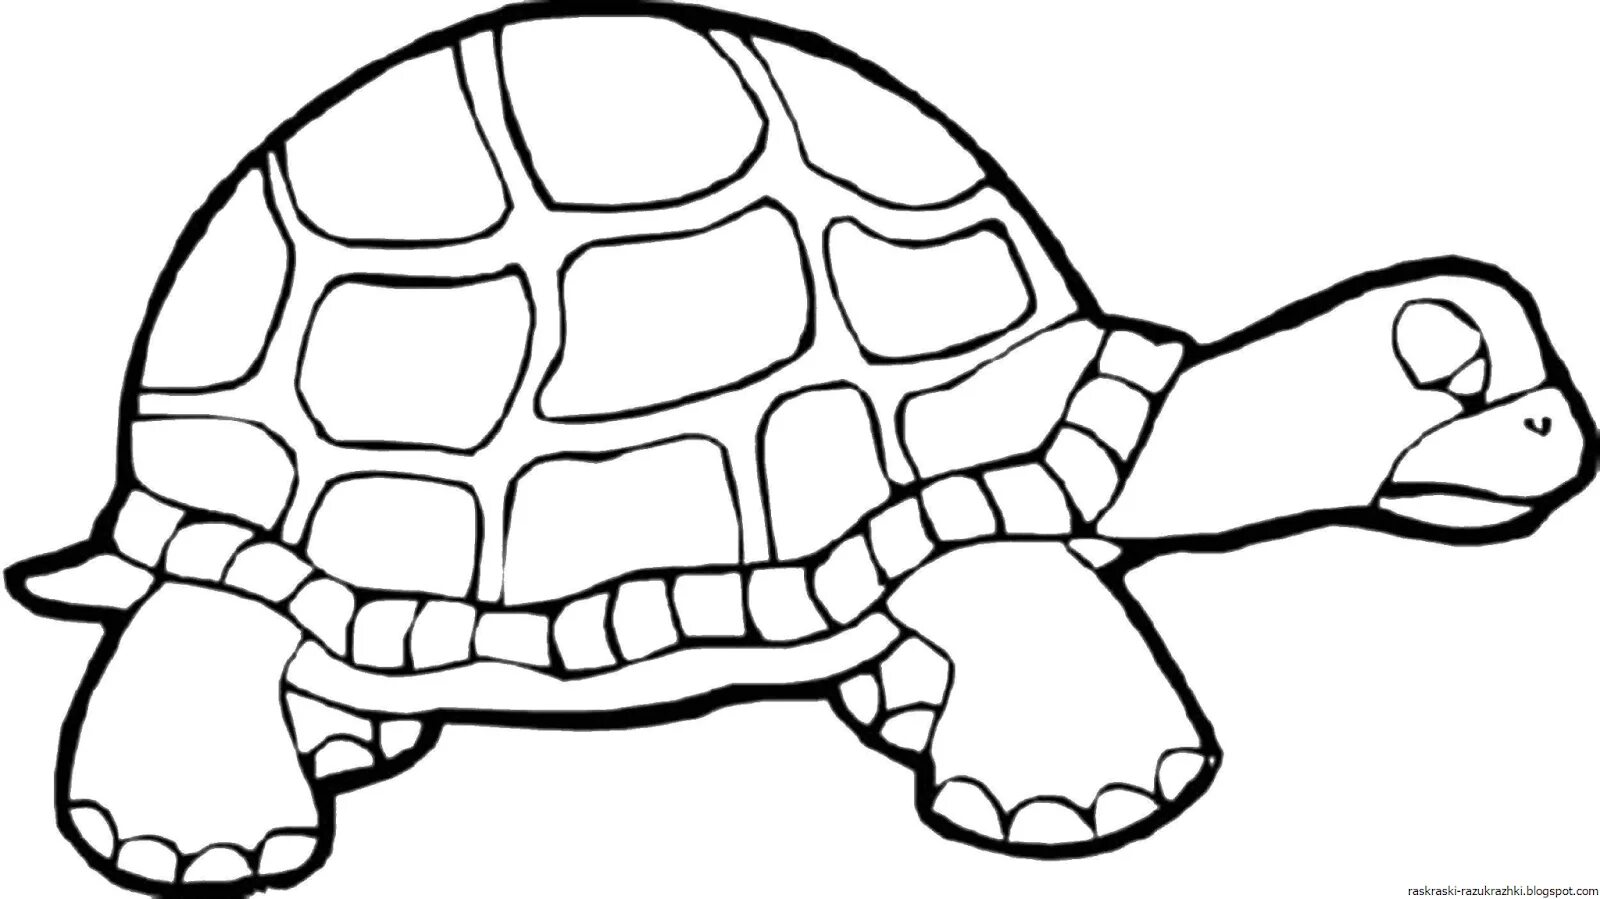 Color cute turtle coloring book for kids